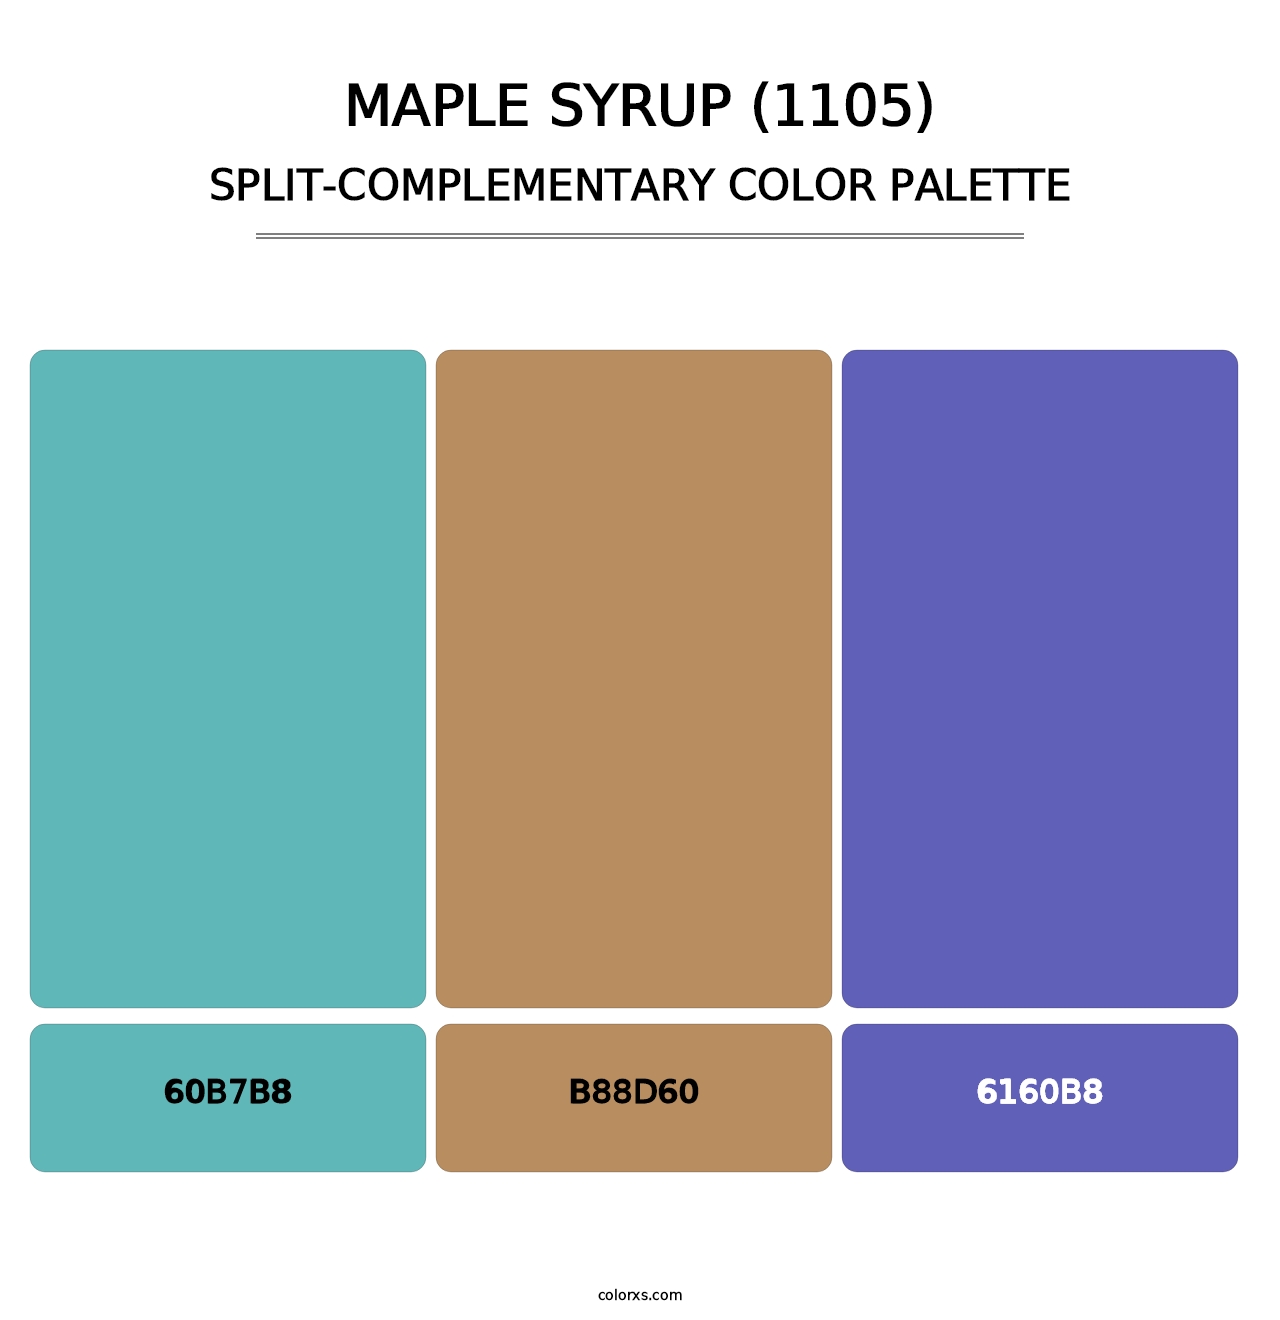 Maple Syrup (1105) - Split-Complementary Color Palette